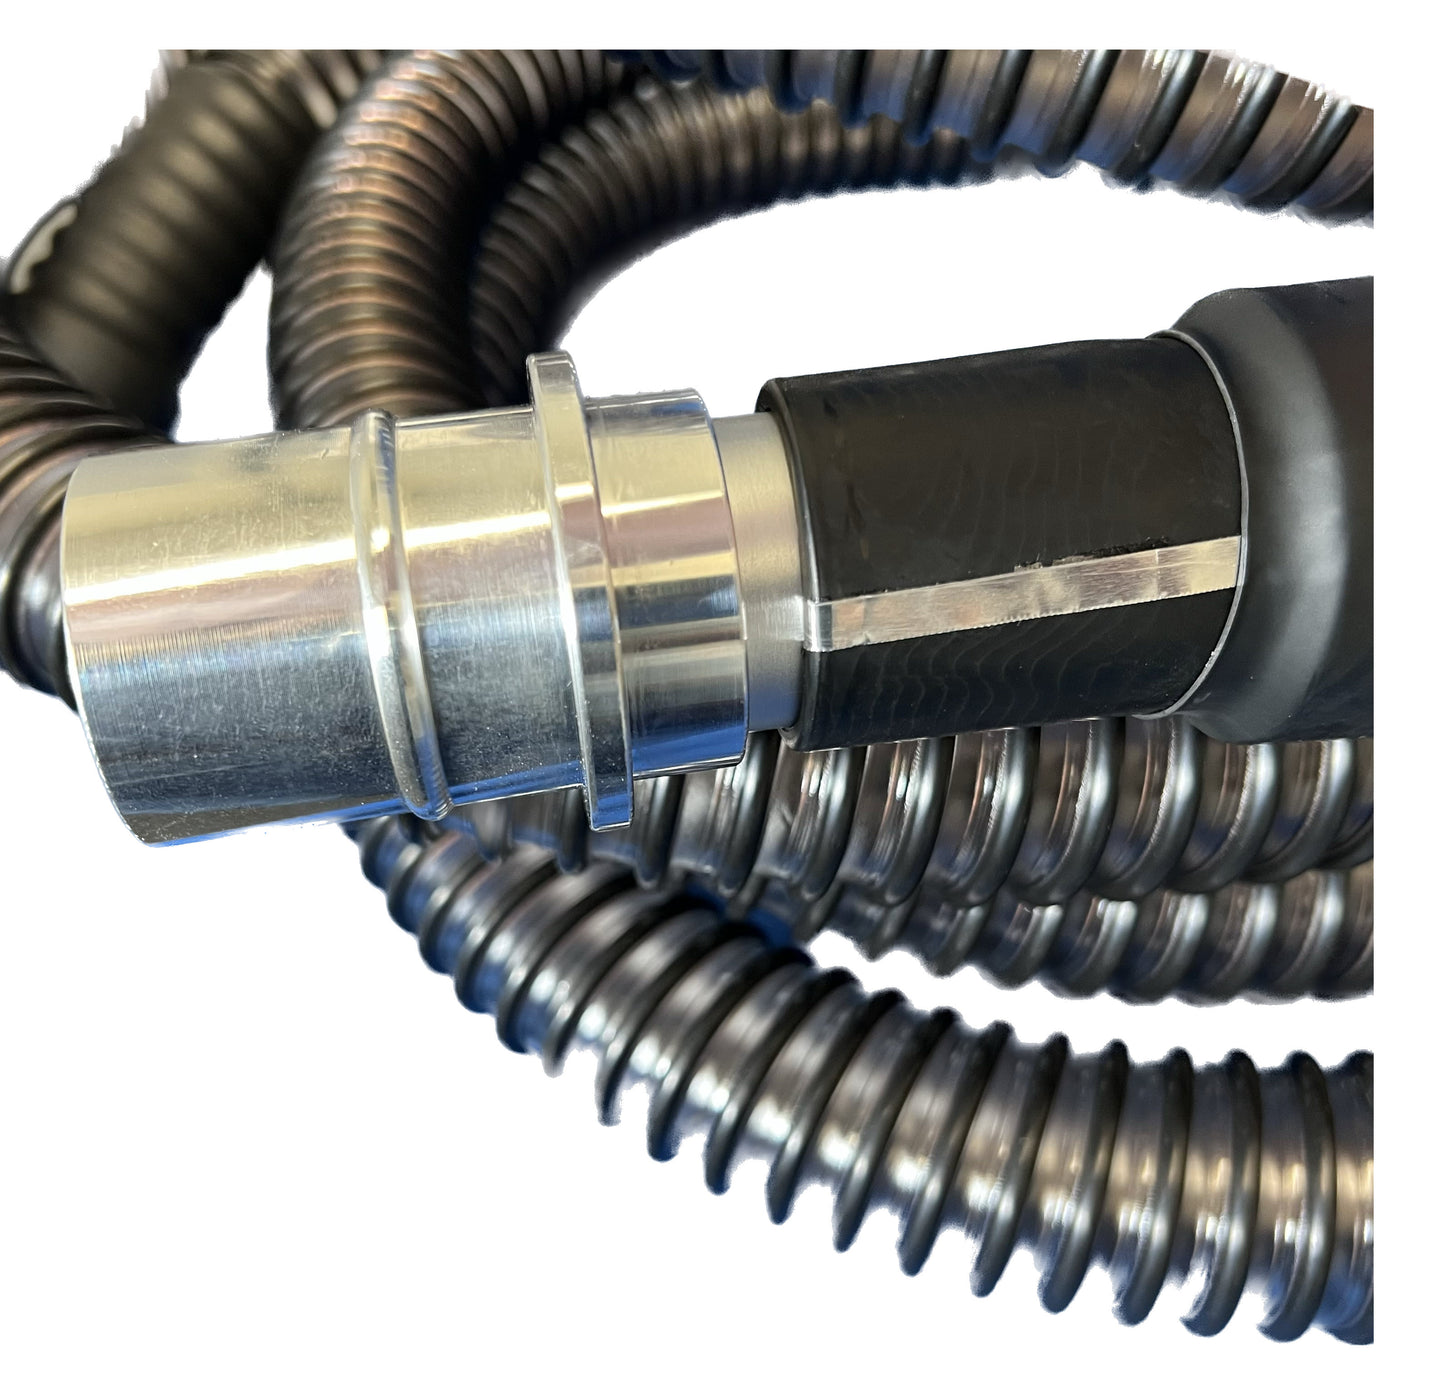 1-1/2" Heavy Duty Corrugated Polyurethane Grounded Vacuum Hose with Cuffs, Flexaust FlexStat® Hose, Clear Color, 10', 15', 25' and 50' Lengths, Fits Latching and Non-Latching Inlet Valves